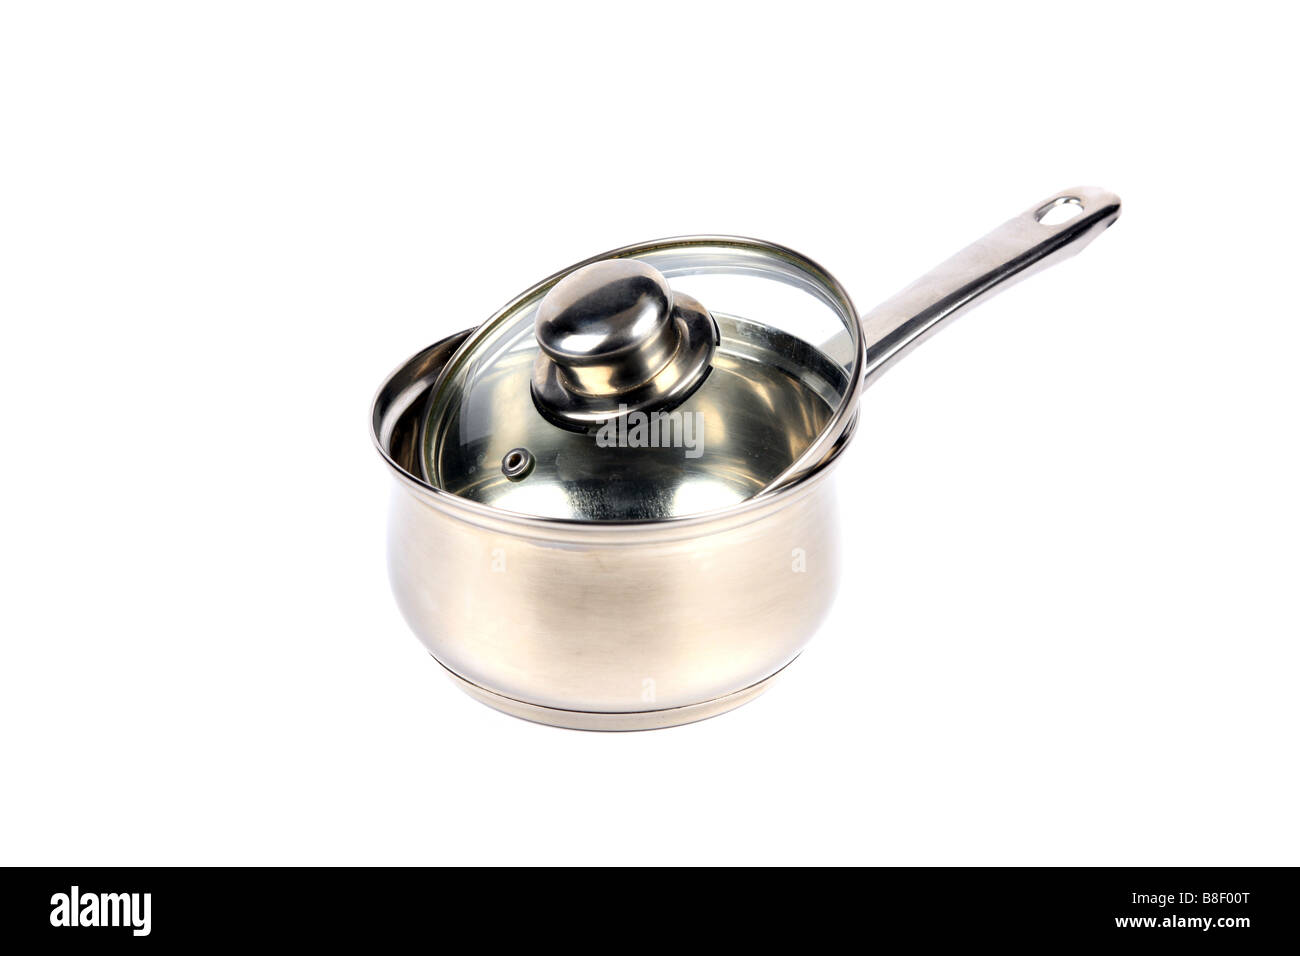 Single Stainless Steel Saucepan with glass lid against a white background Stock Photo